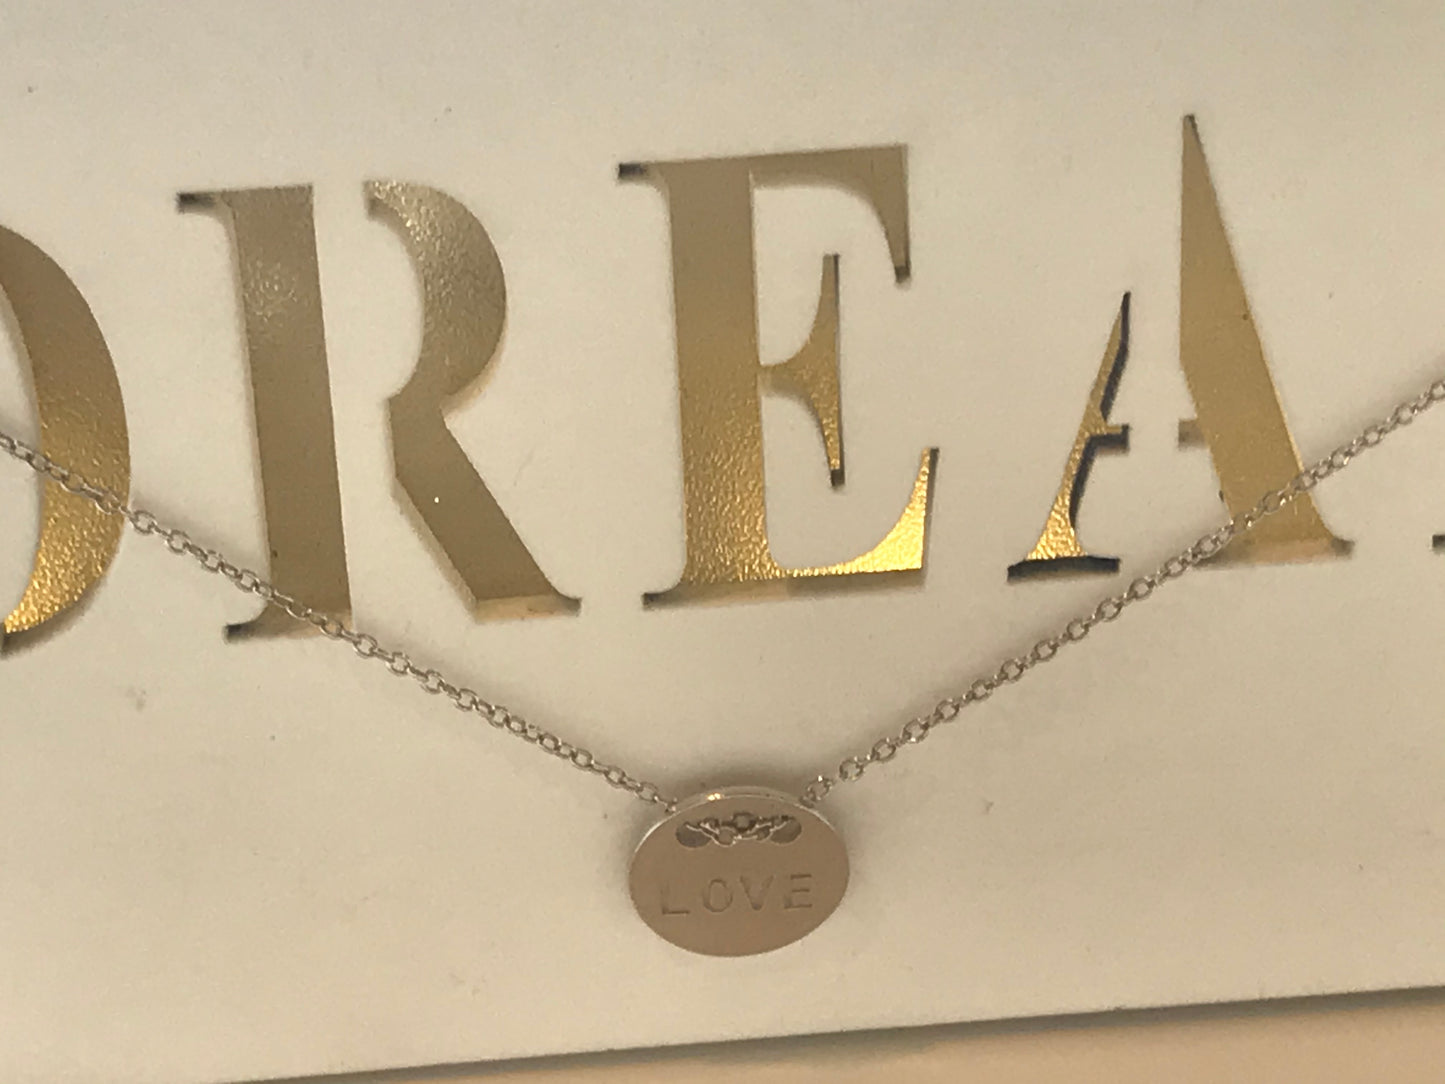 Love Is All You Need Silver Disc Necklace